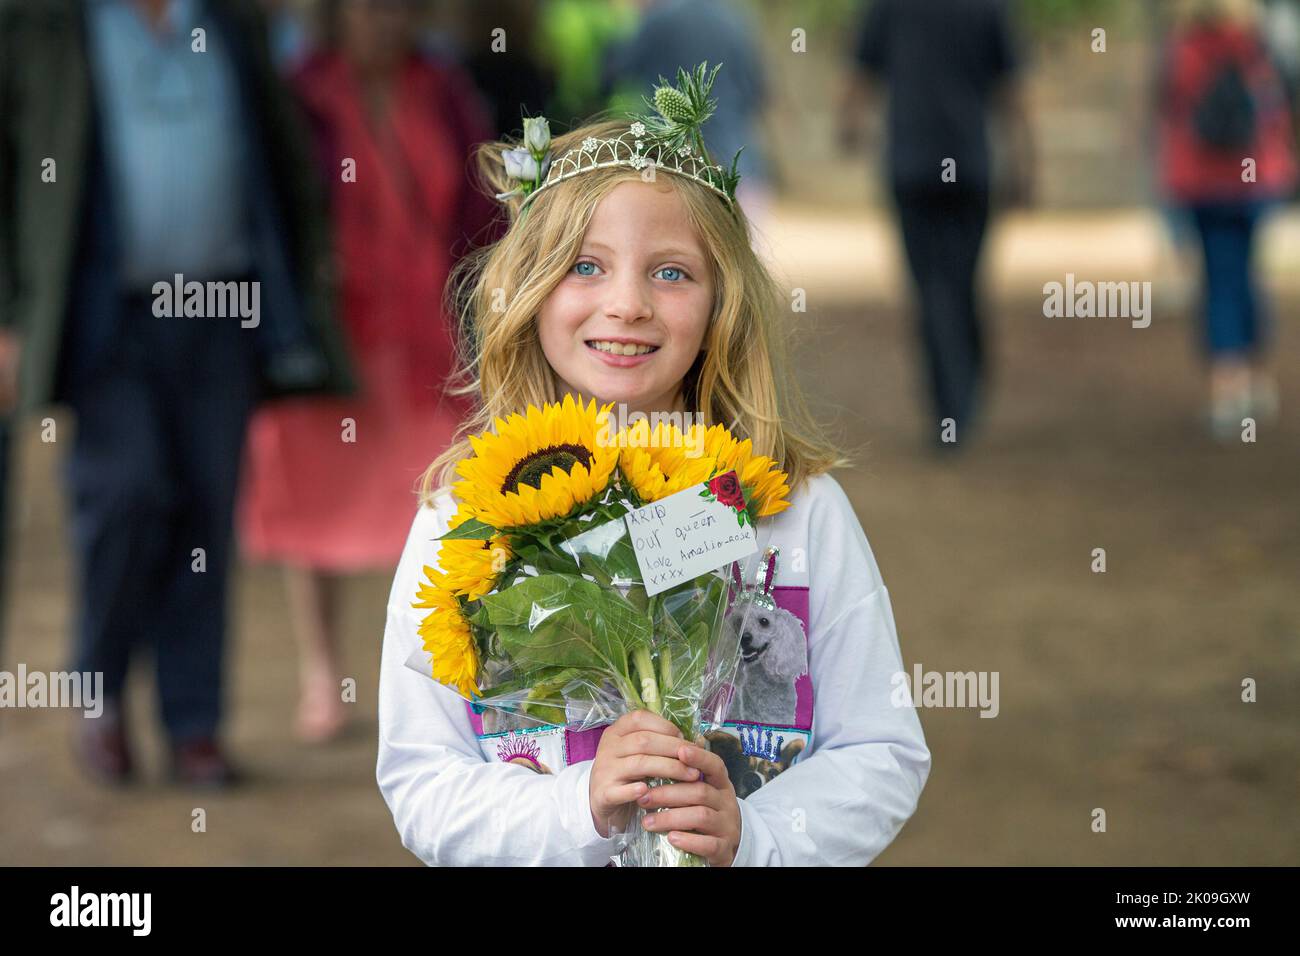 A young girl, Amelia-Rose, brings flowers with message , RIP our Queen - Mourners gather at Buckingham Palace placing flowers and paying their respects - Queen Elizabeth the second died yesterday in her Platinum Jubillee year at Balmoral Castle. Photo Horst A. Friedrichs Alamy Live News Stock Photo